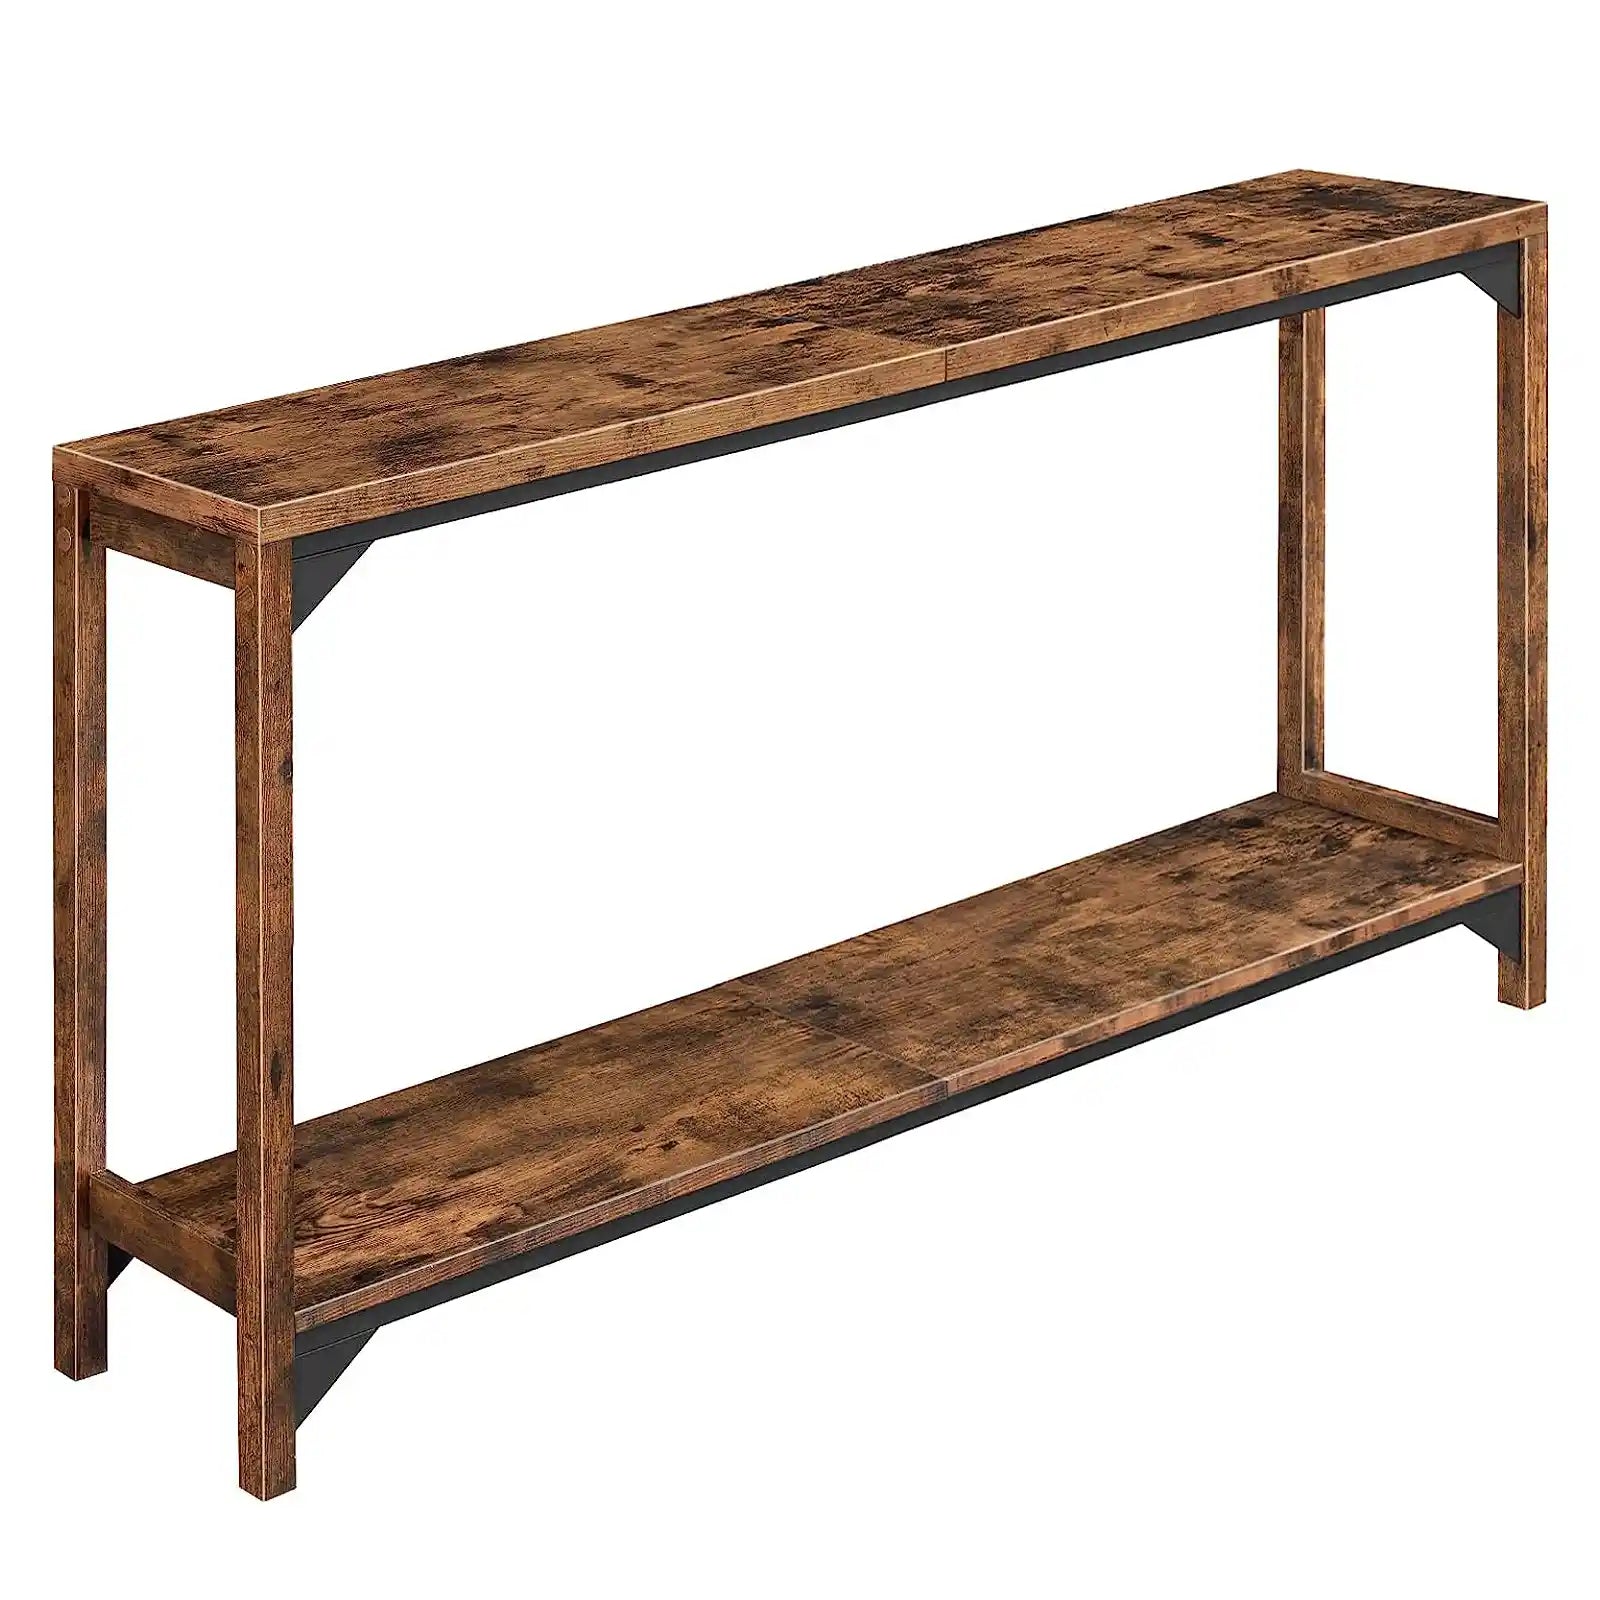 Sofa Table, Console Table, Narrow Long Entryway Table, Industrial Console Table, 1.2" Thickened Top, 62.2" L Console Desk Table for Entryway, Living Room, Hallway